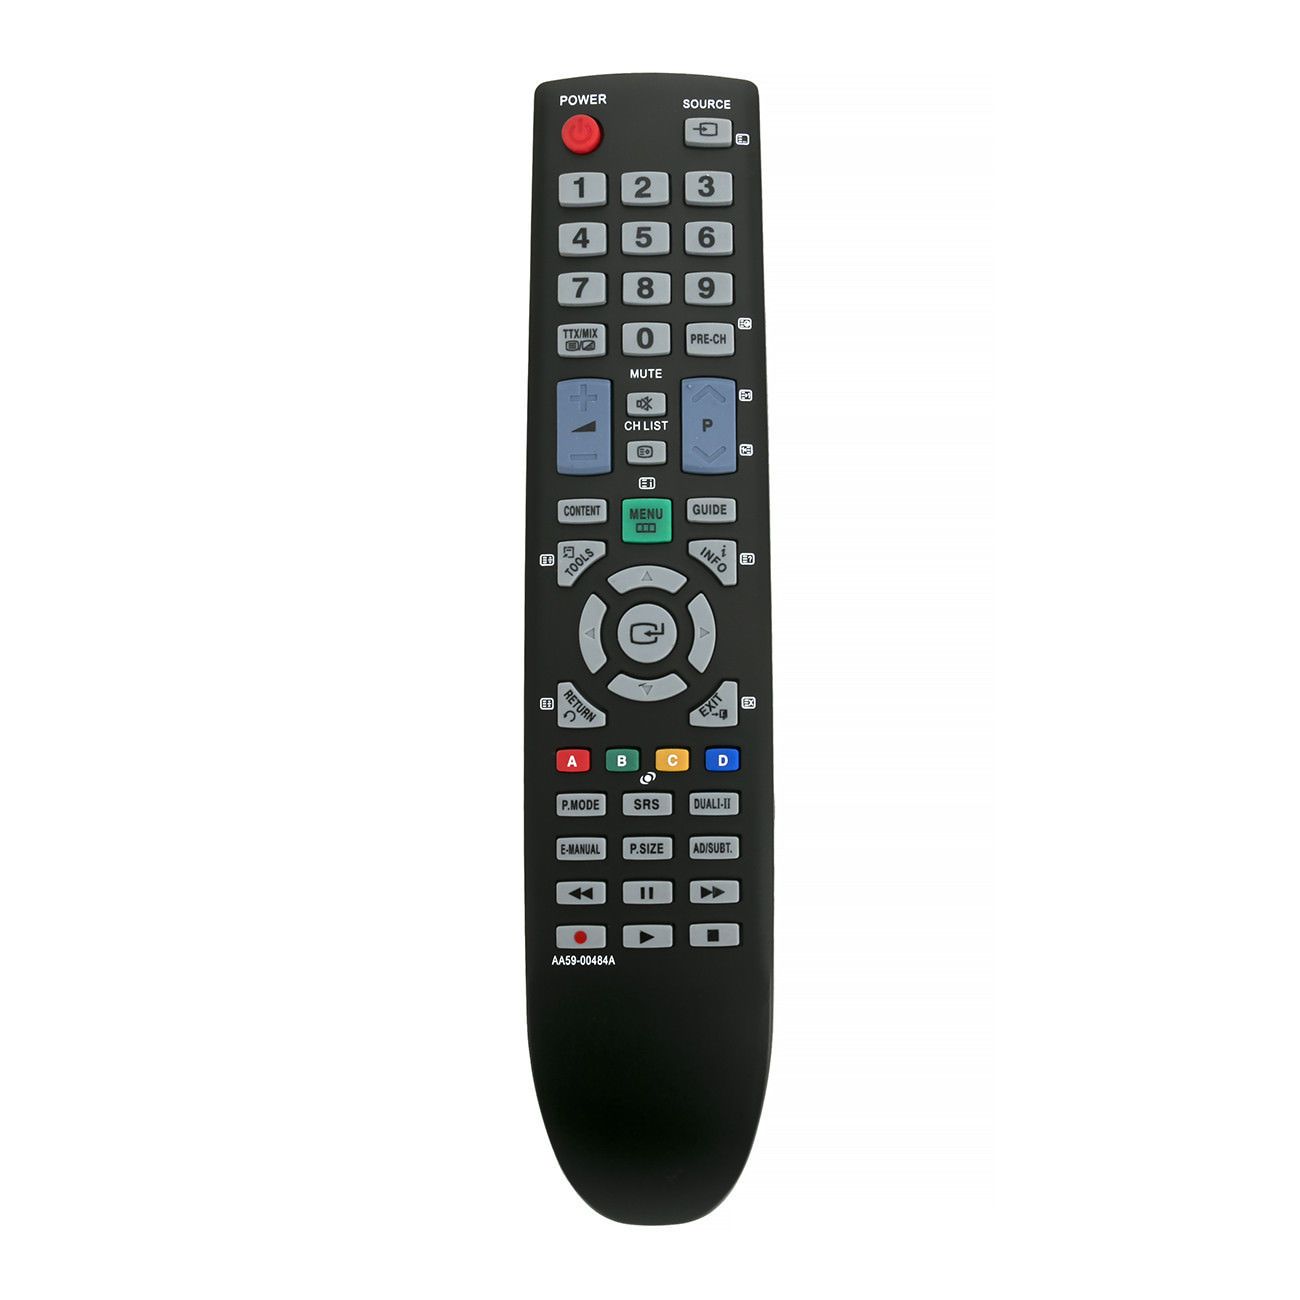 AA59-00484A Replacement Remote Control for Samsung TV PS51D450A2M PS51D450A2W PS51D450